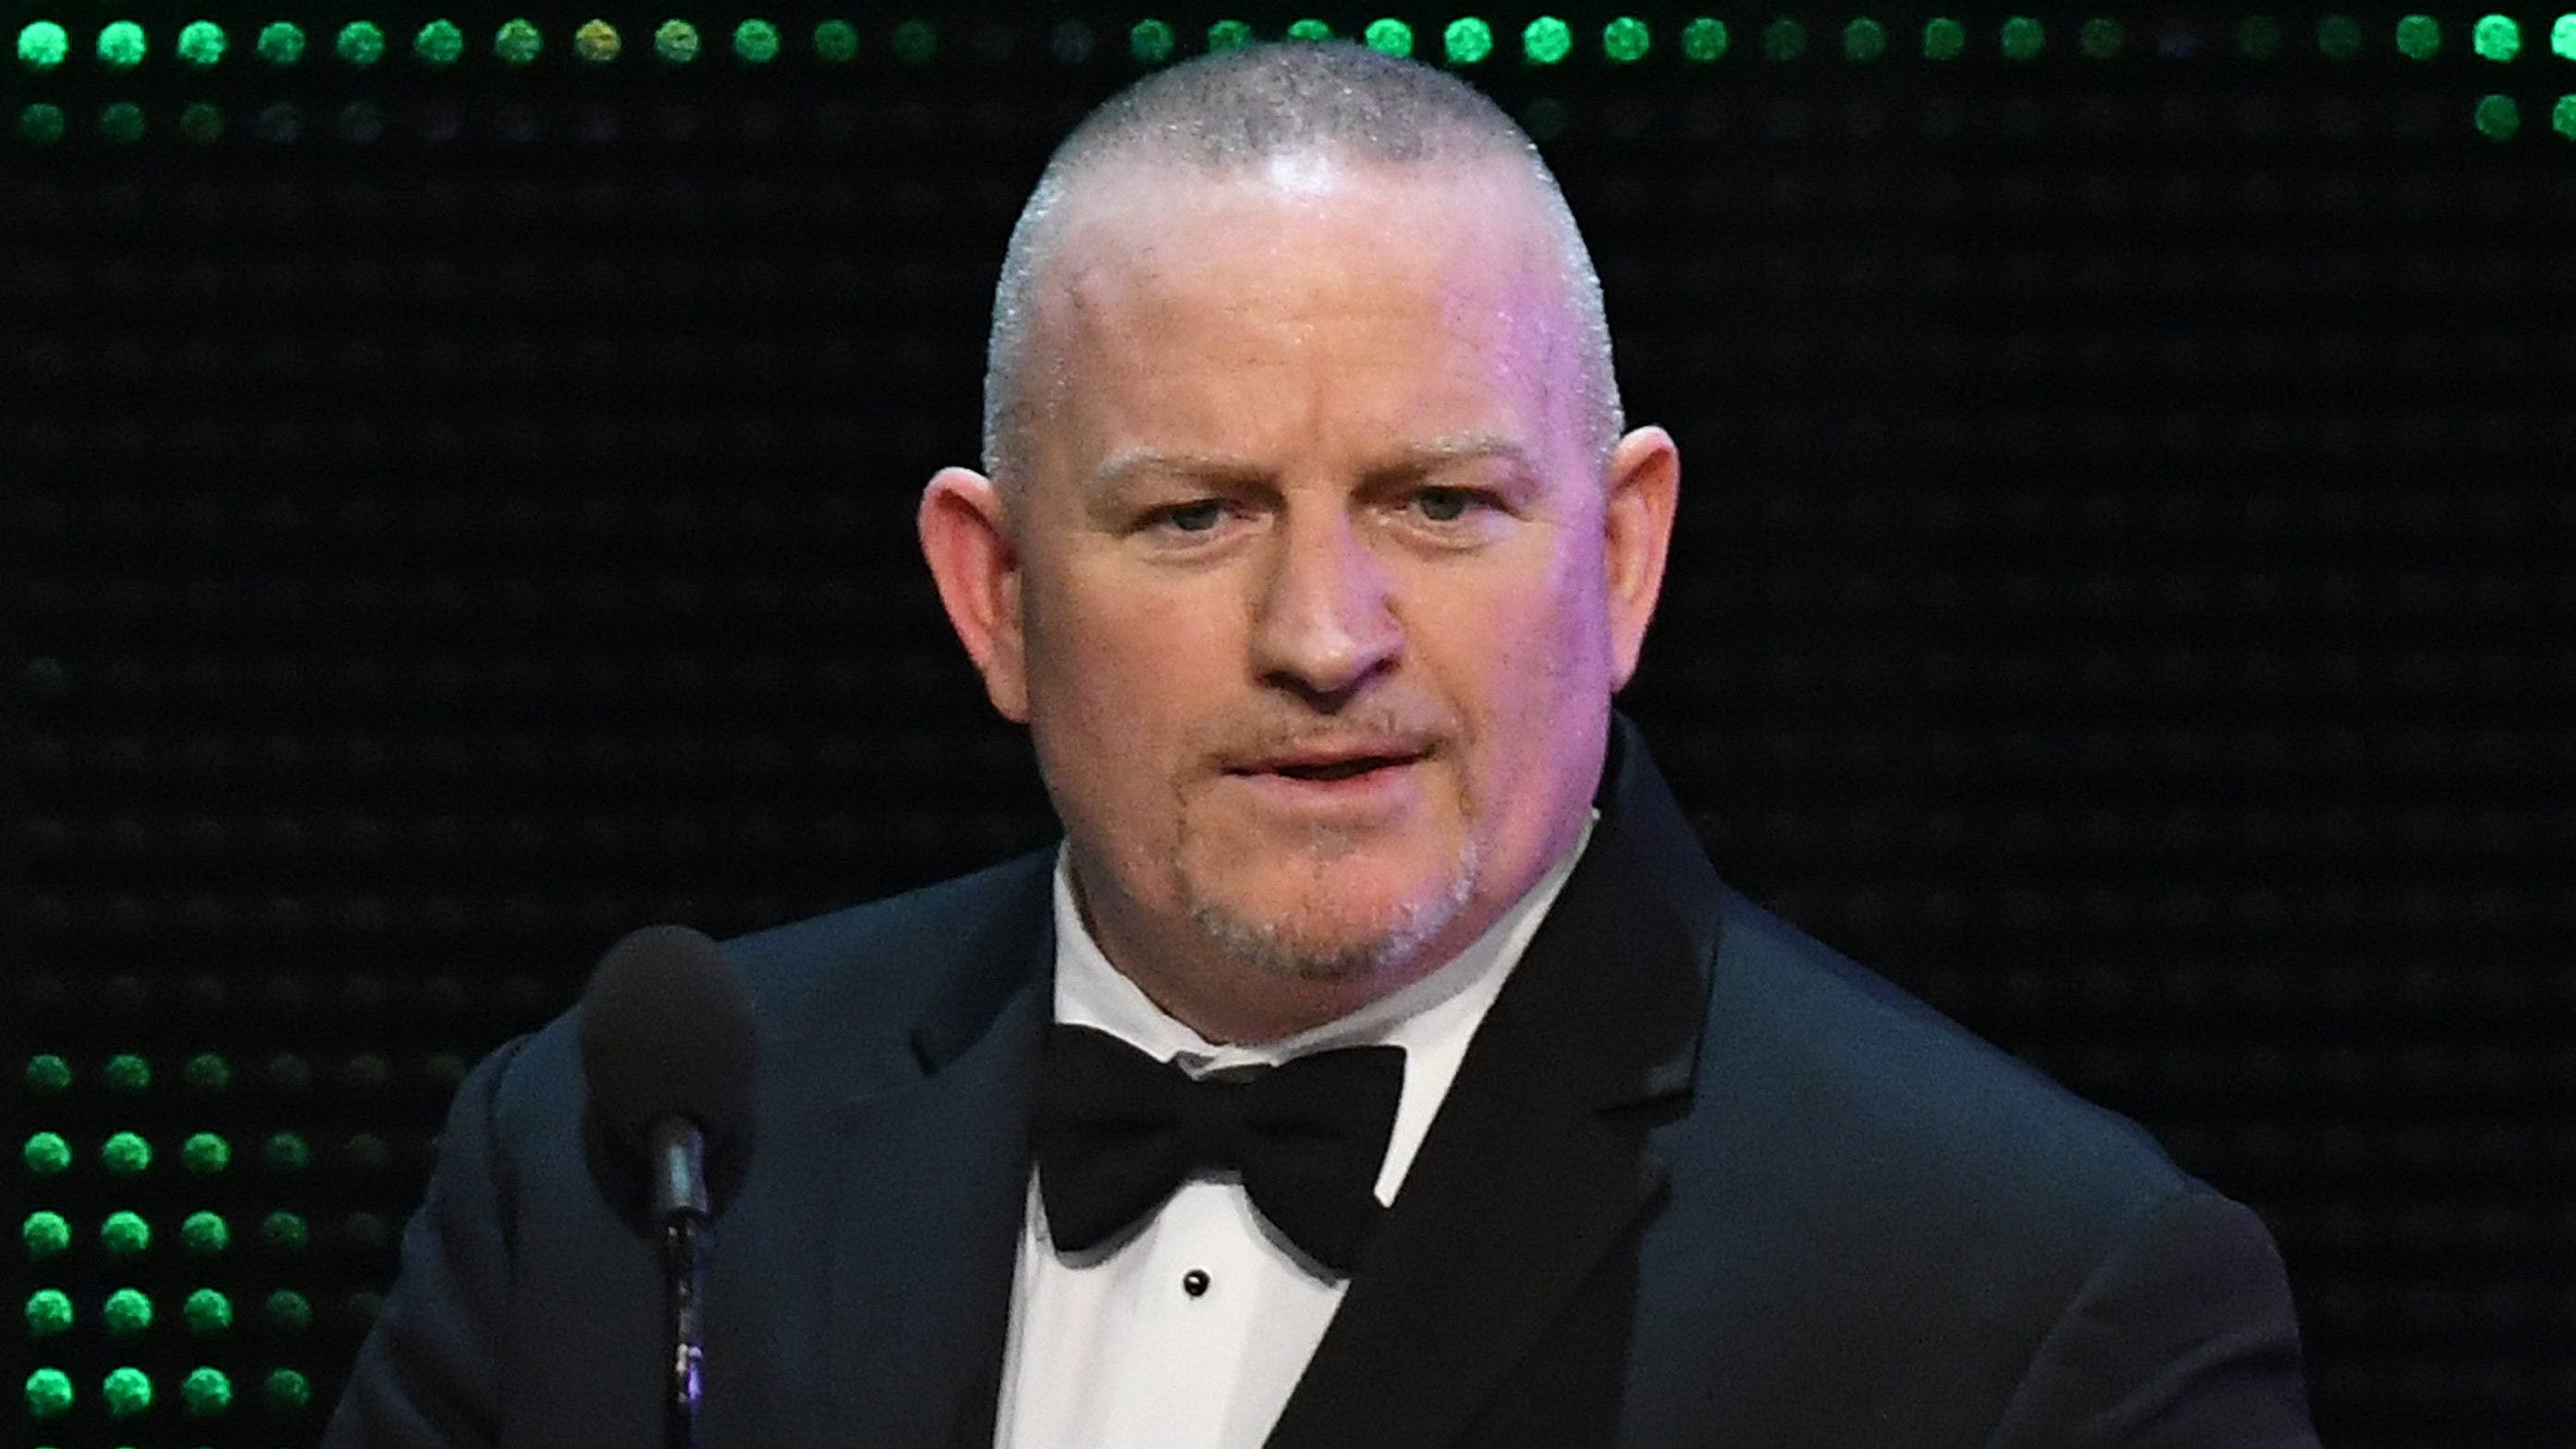 WWE Road Dogg hospitalized after heart attack, says wife